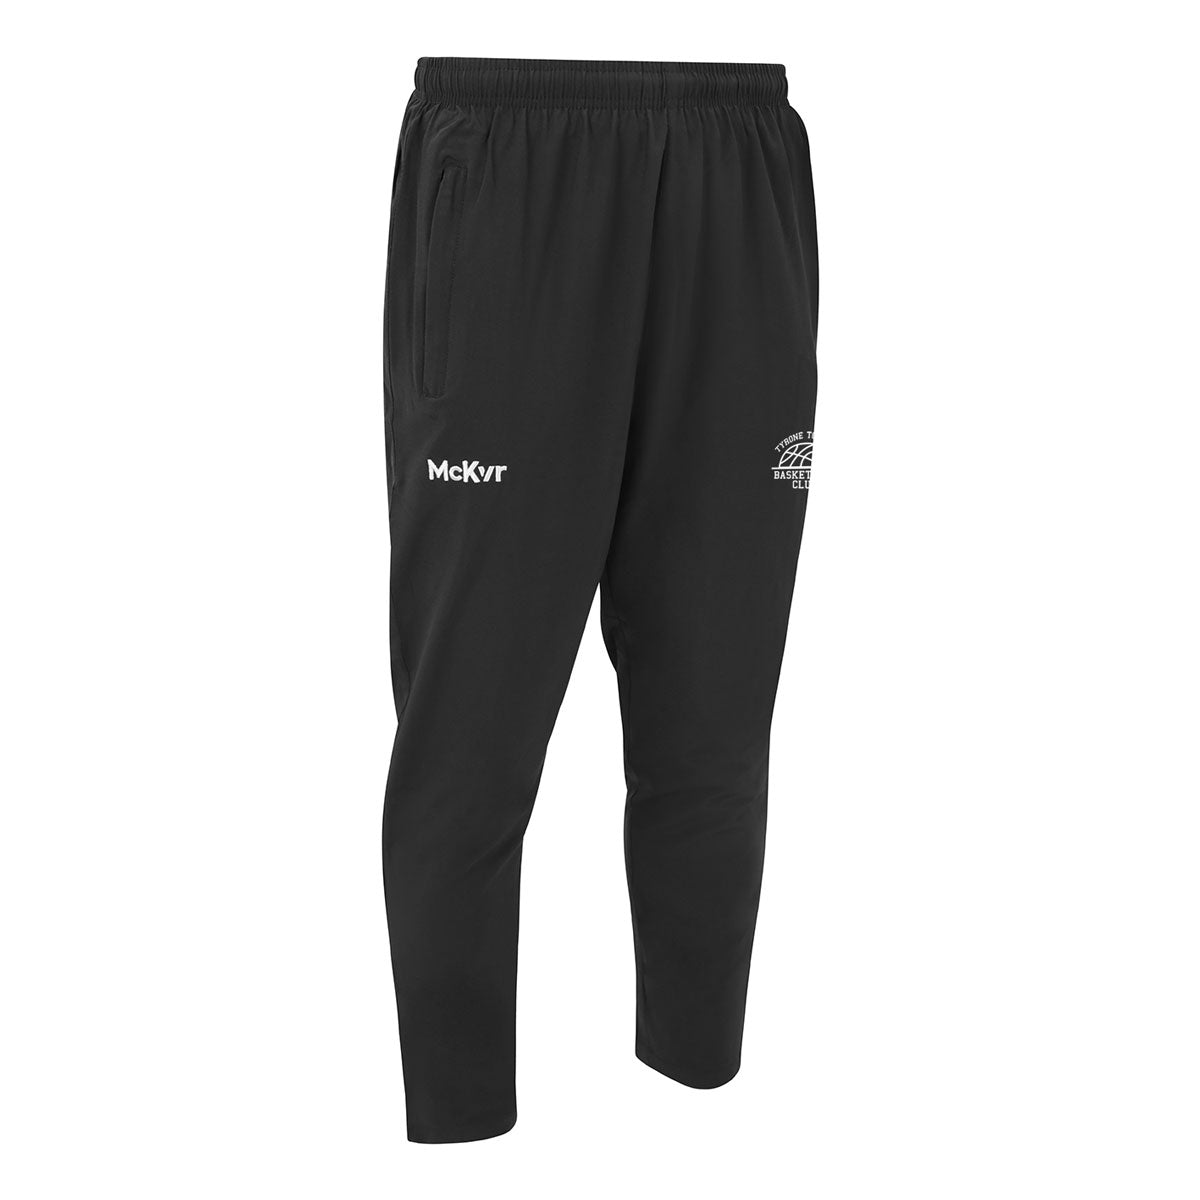 Mc Keever Tyrone Towers Basketball Core 22 Tapered Pants - Adult - Black